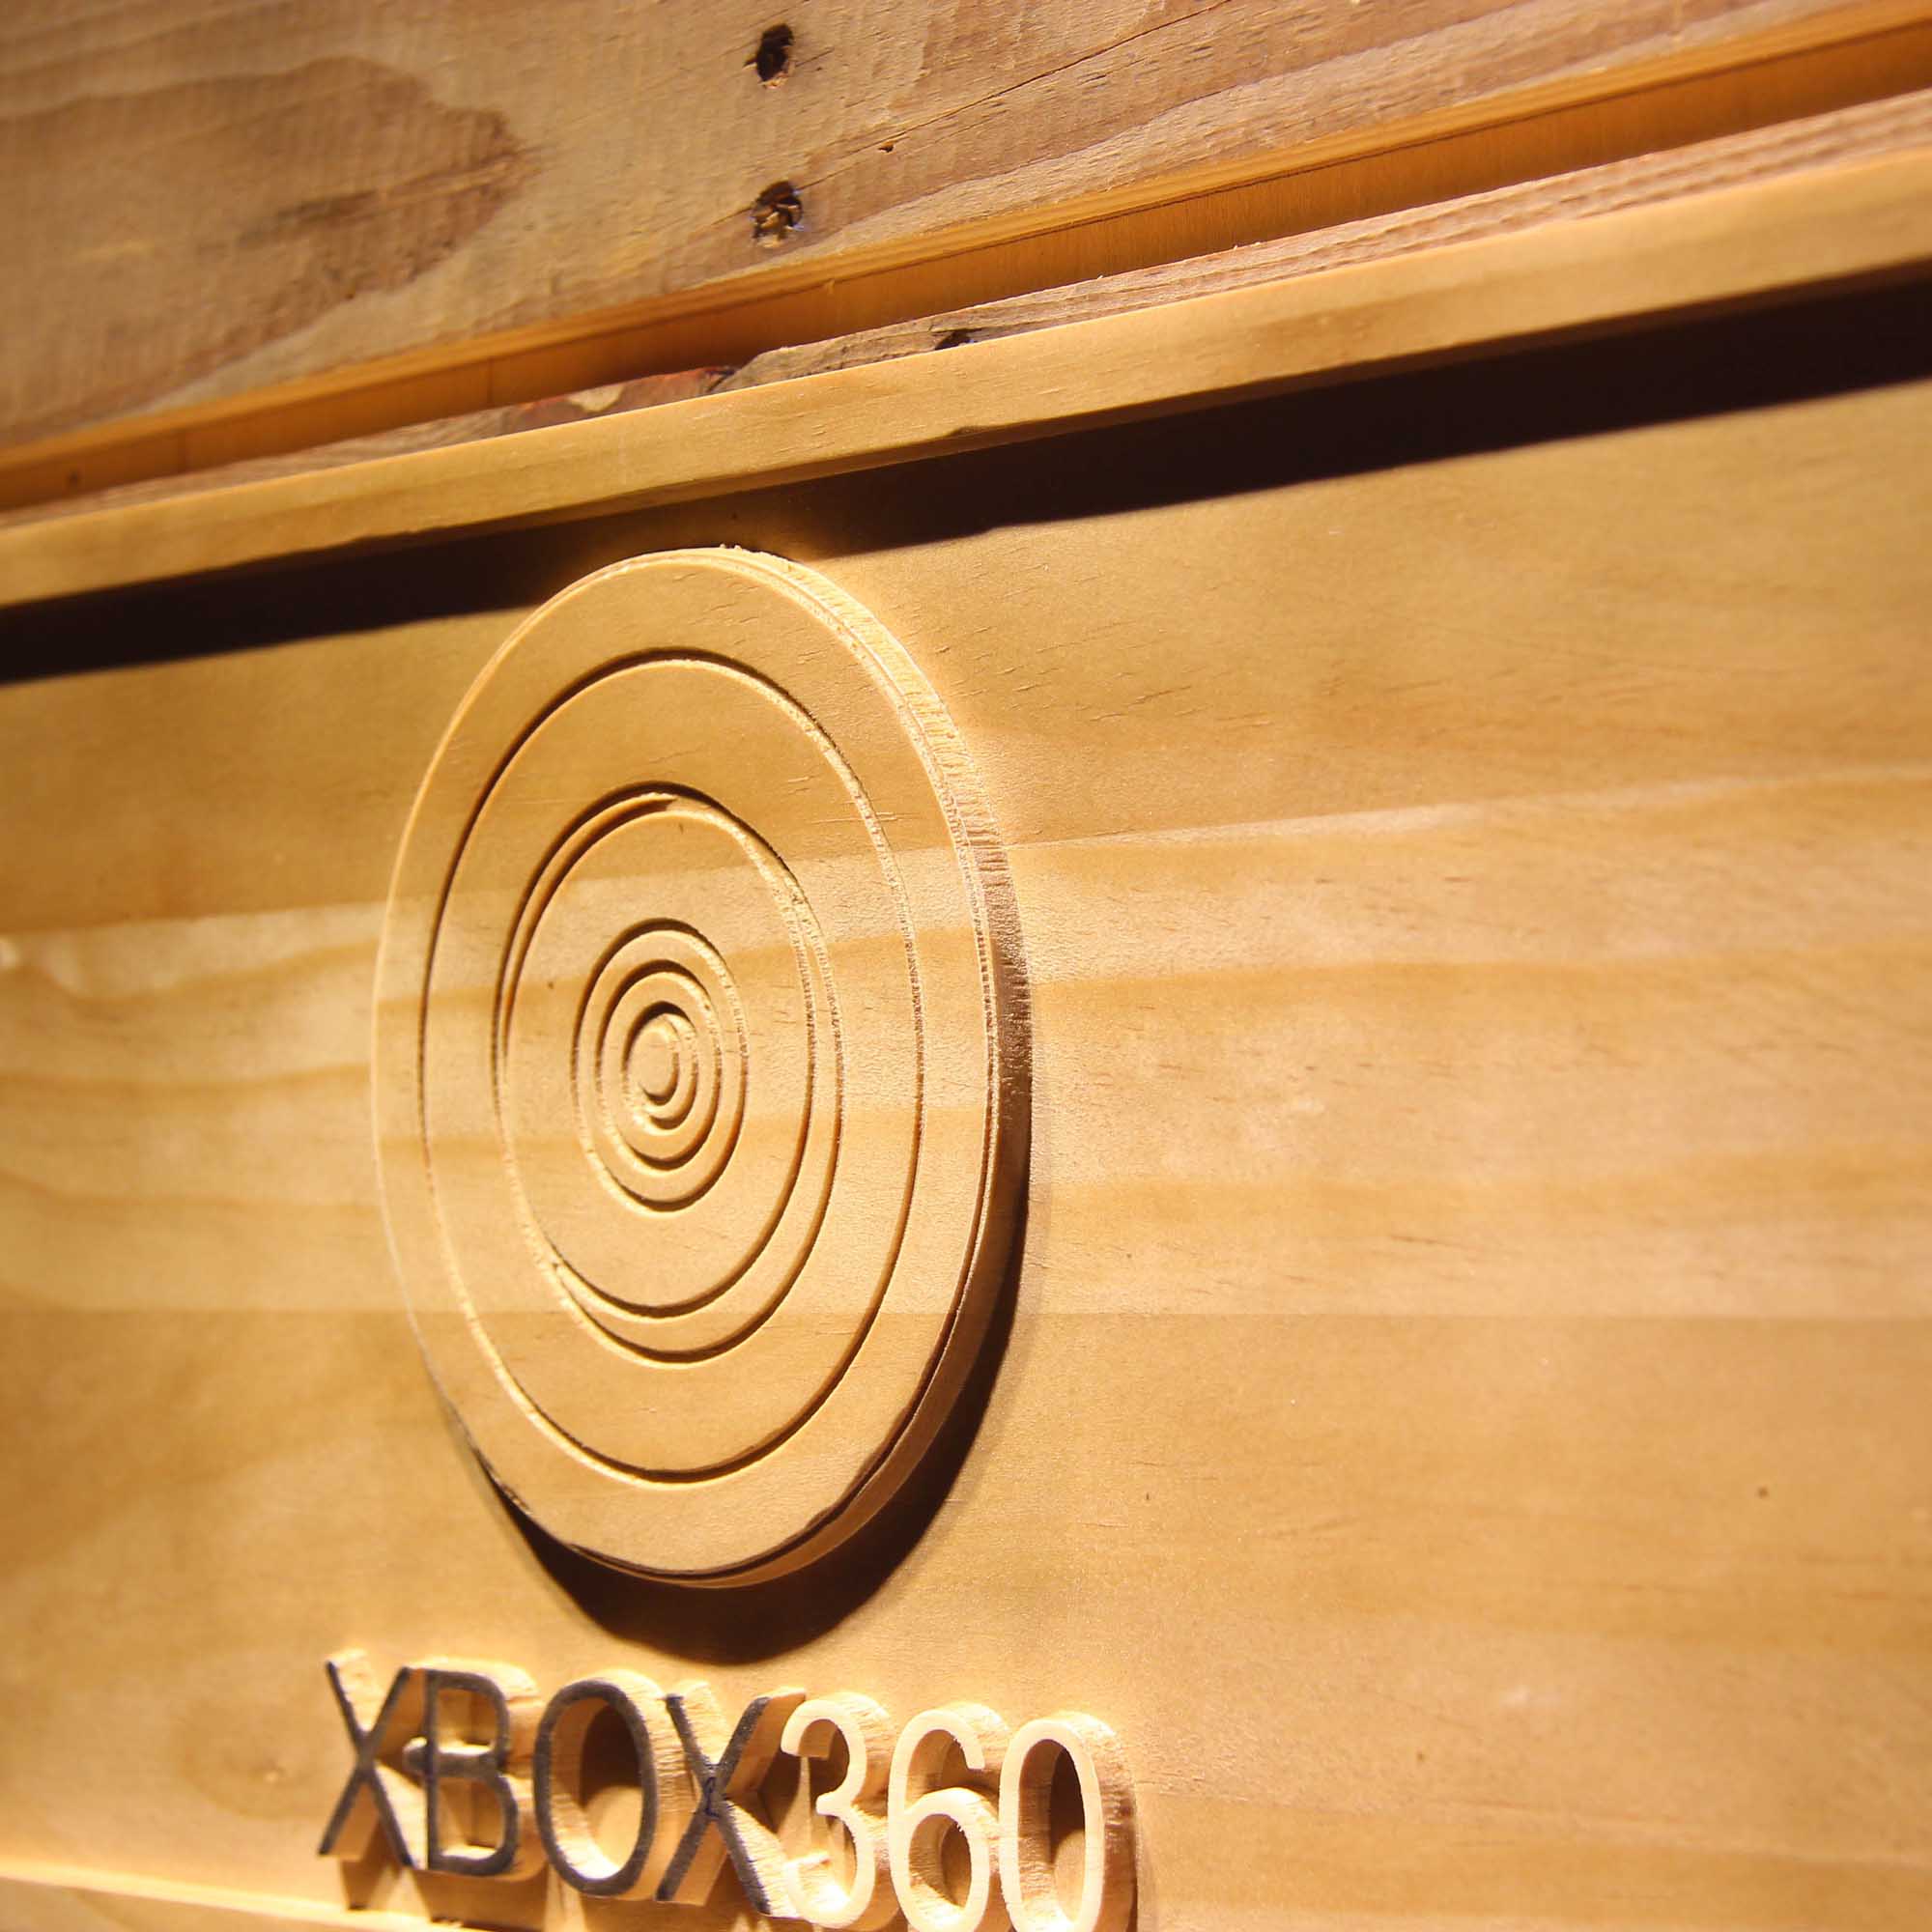 Xbox 360 Man Cave 3D Wooden Engrave Sign